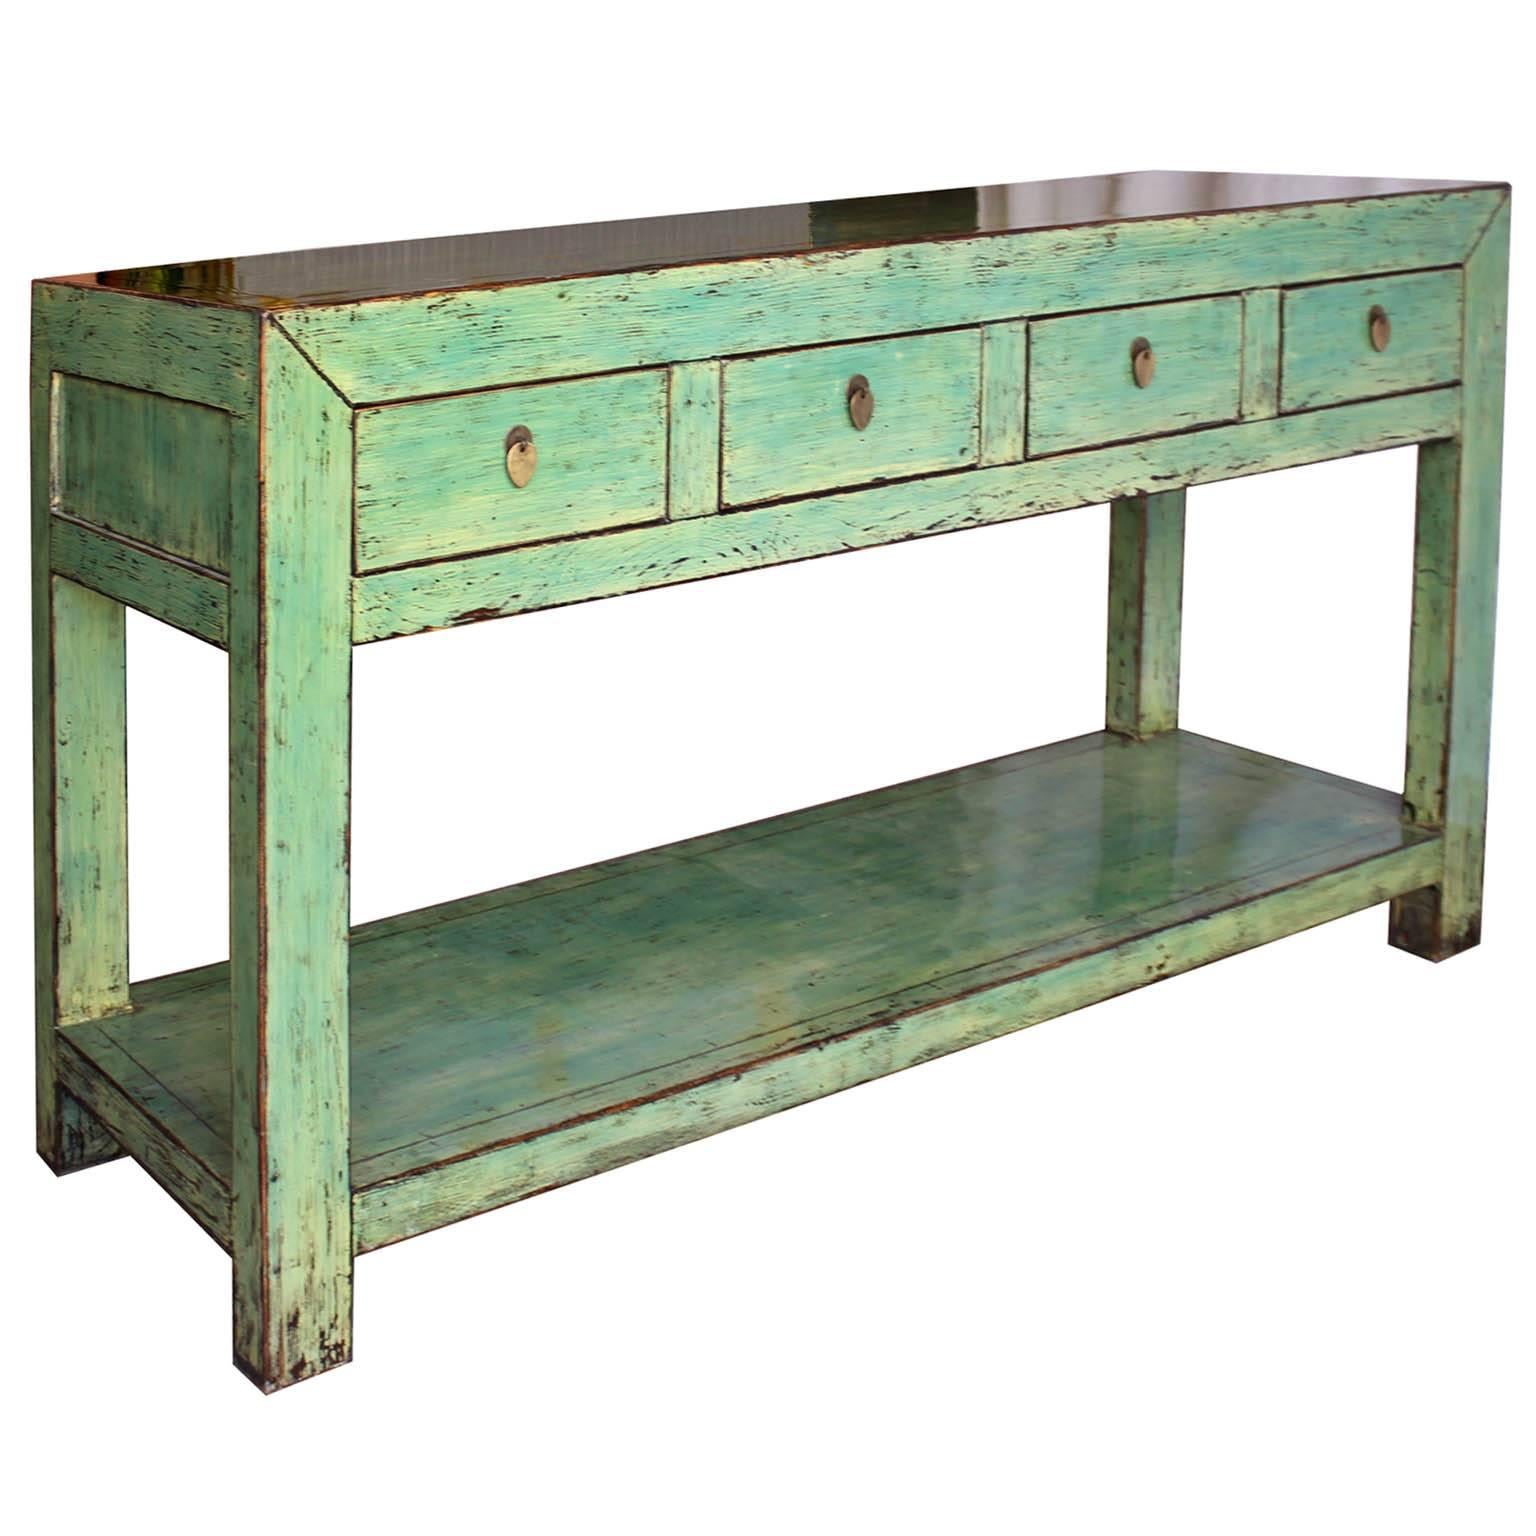 Hand-lacquered four-drawer console table with clean lines and exposed wood edges. Add a pop of color by placing the console behind a sofa, in an entryway or against a living room wall beneath some art or a flat screen tv.